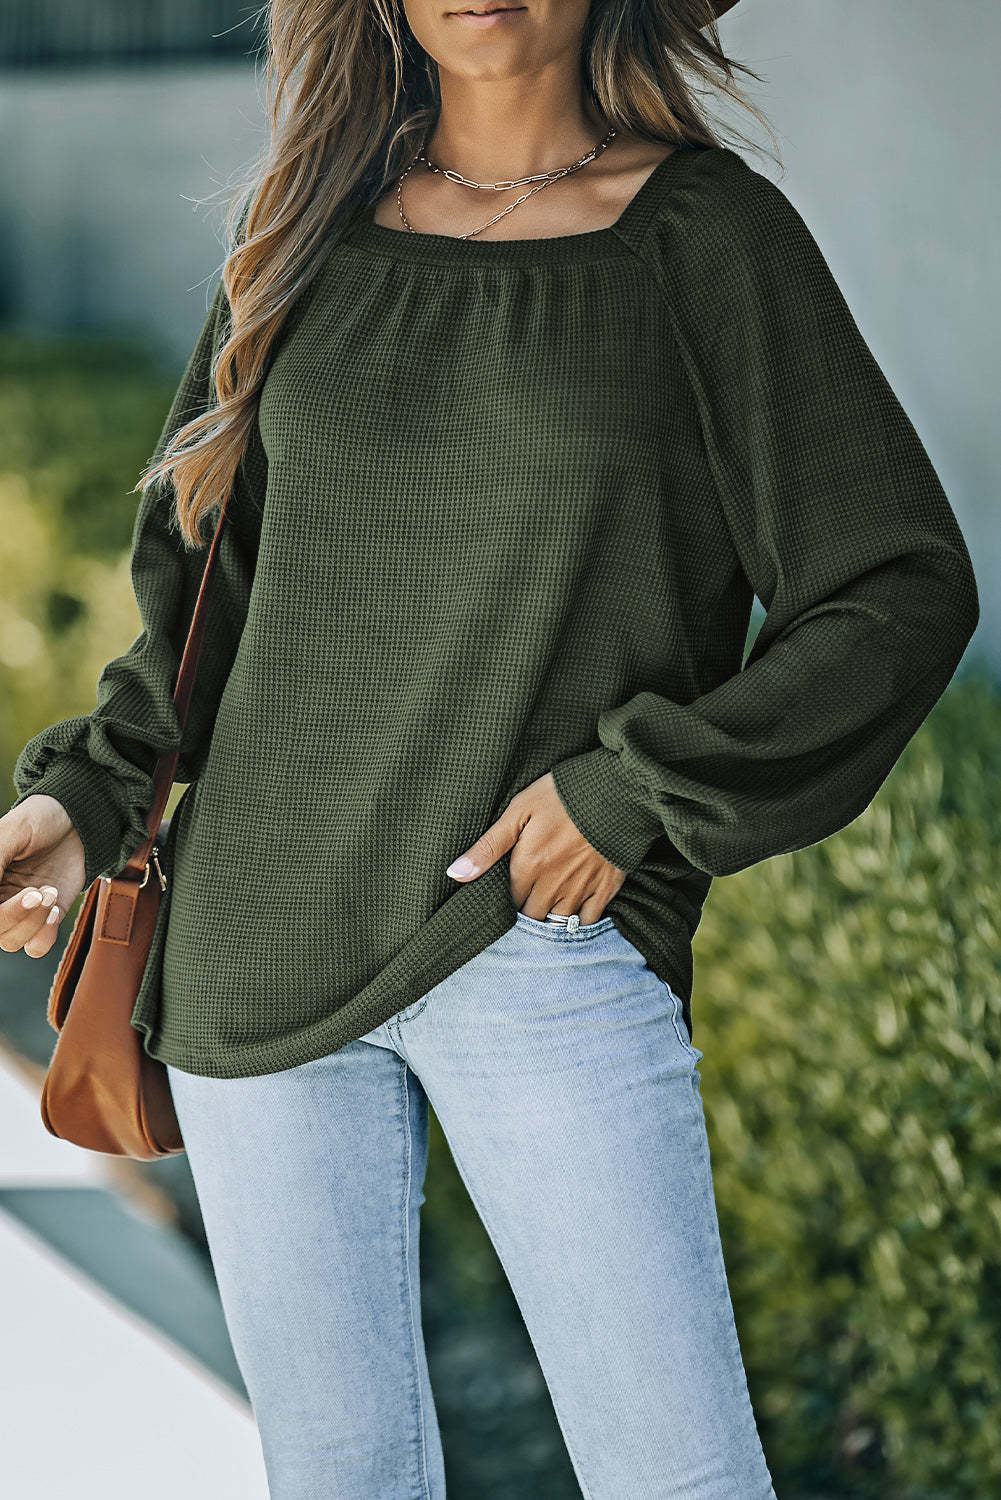 Green Waffle Texture Casual Square Neck Pullover $ 20.99 - Evaless